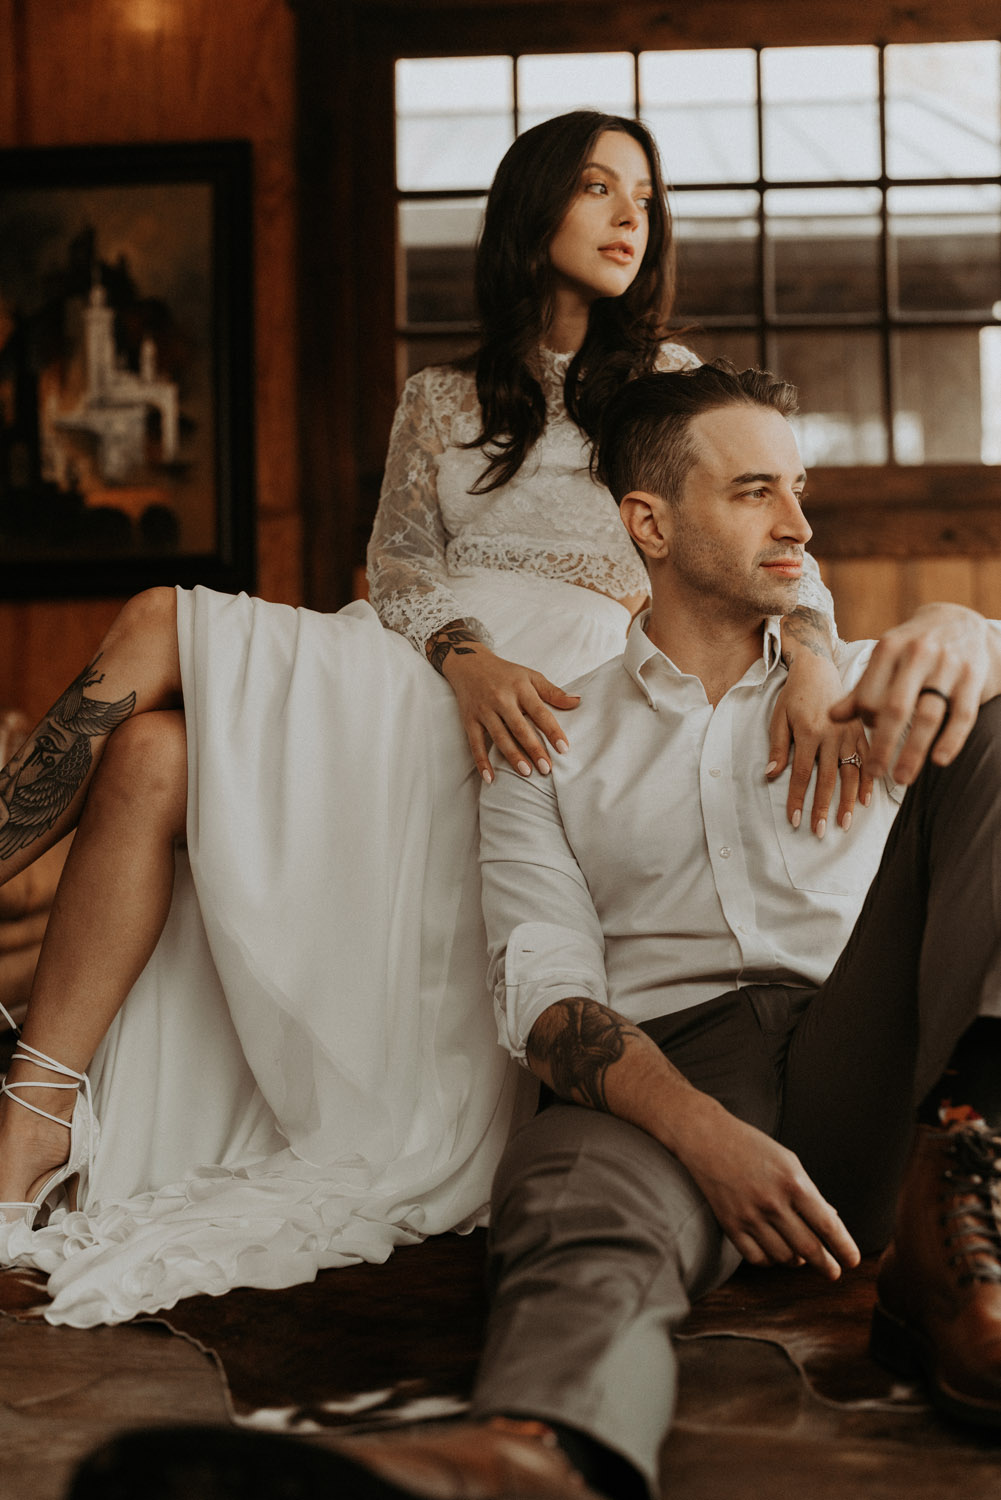 Western chic elopement in North Carolina. Bride and groom sitting together.